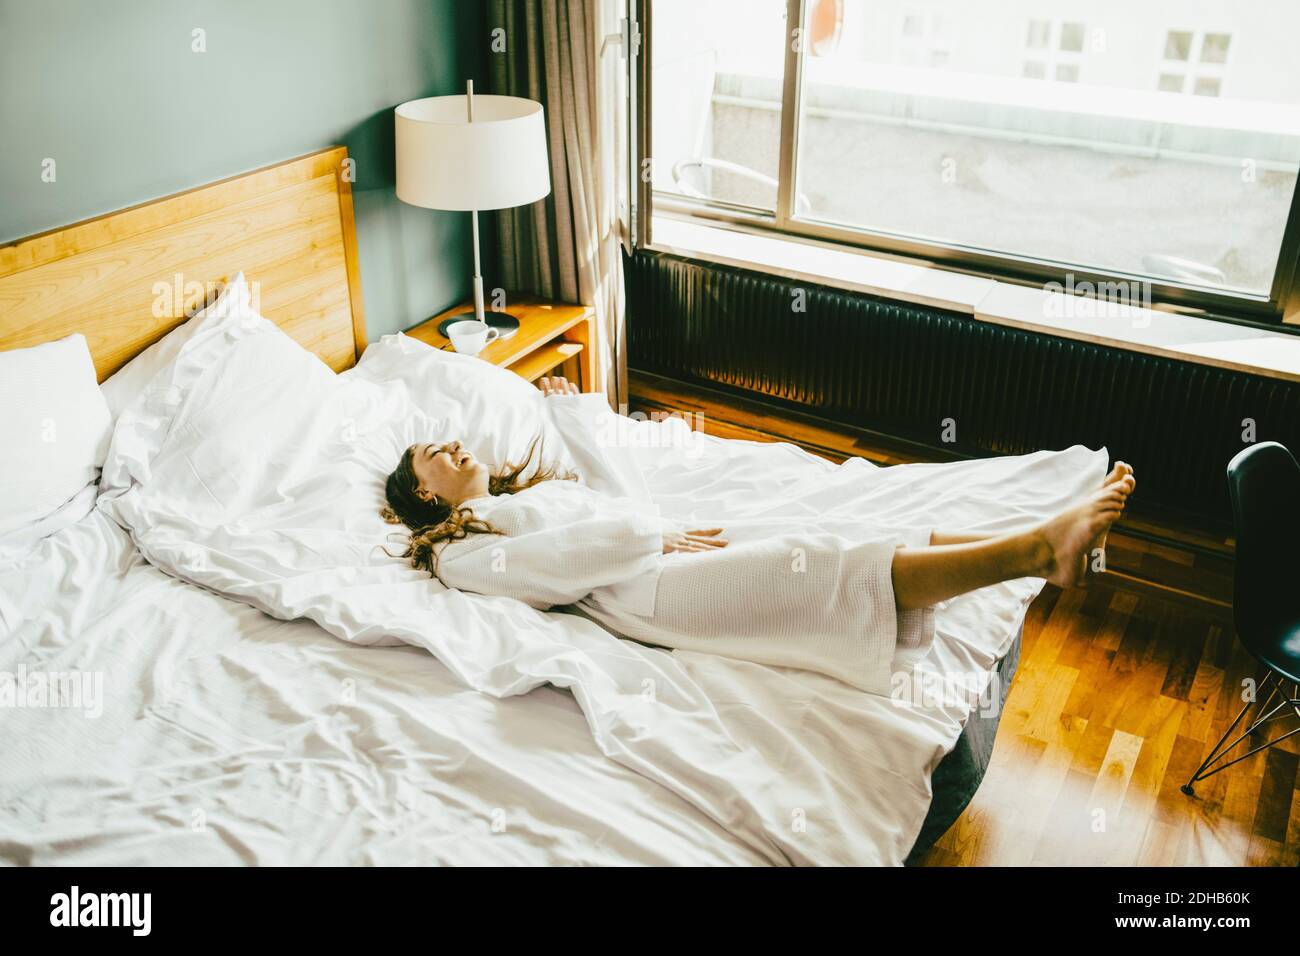 Smiling woman in bathrobe having fun on bed at hotel room Stock Photo